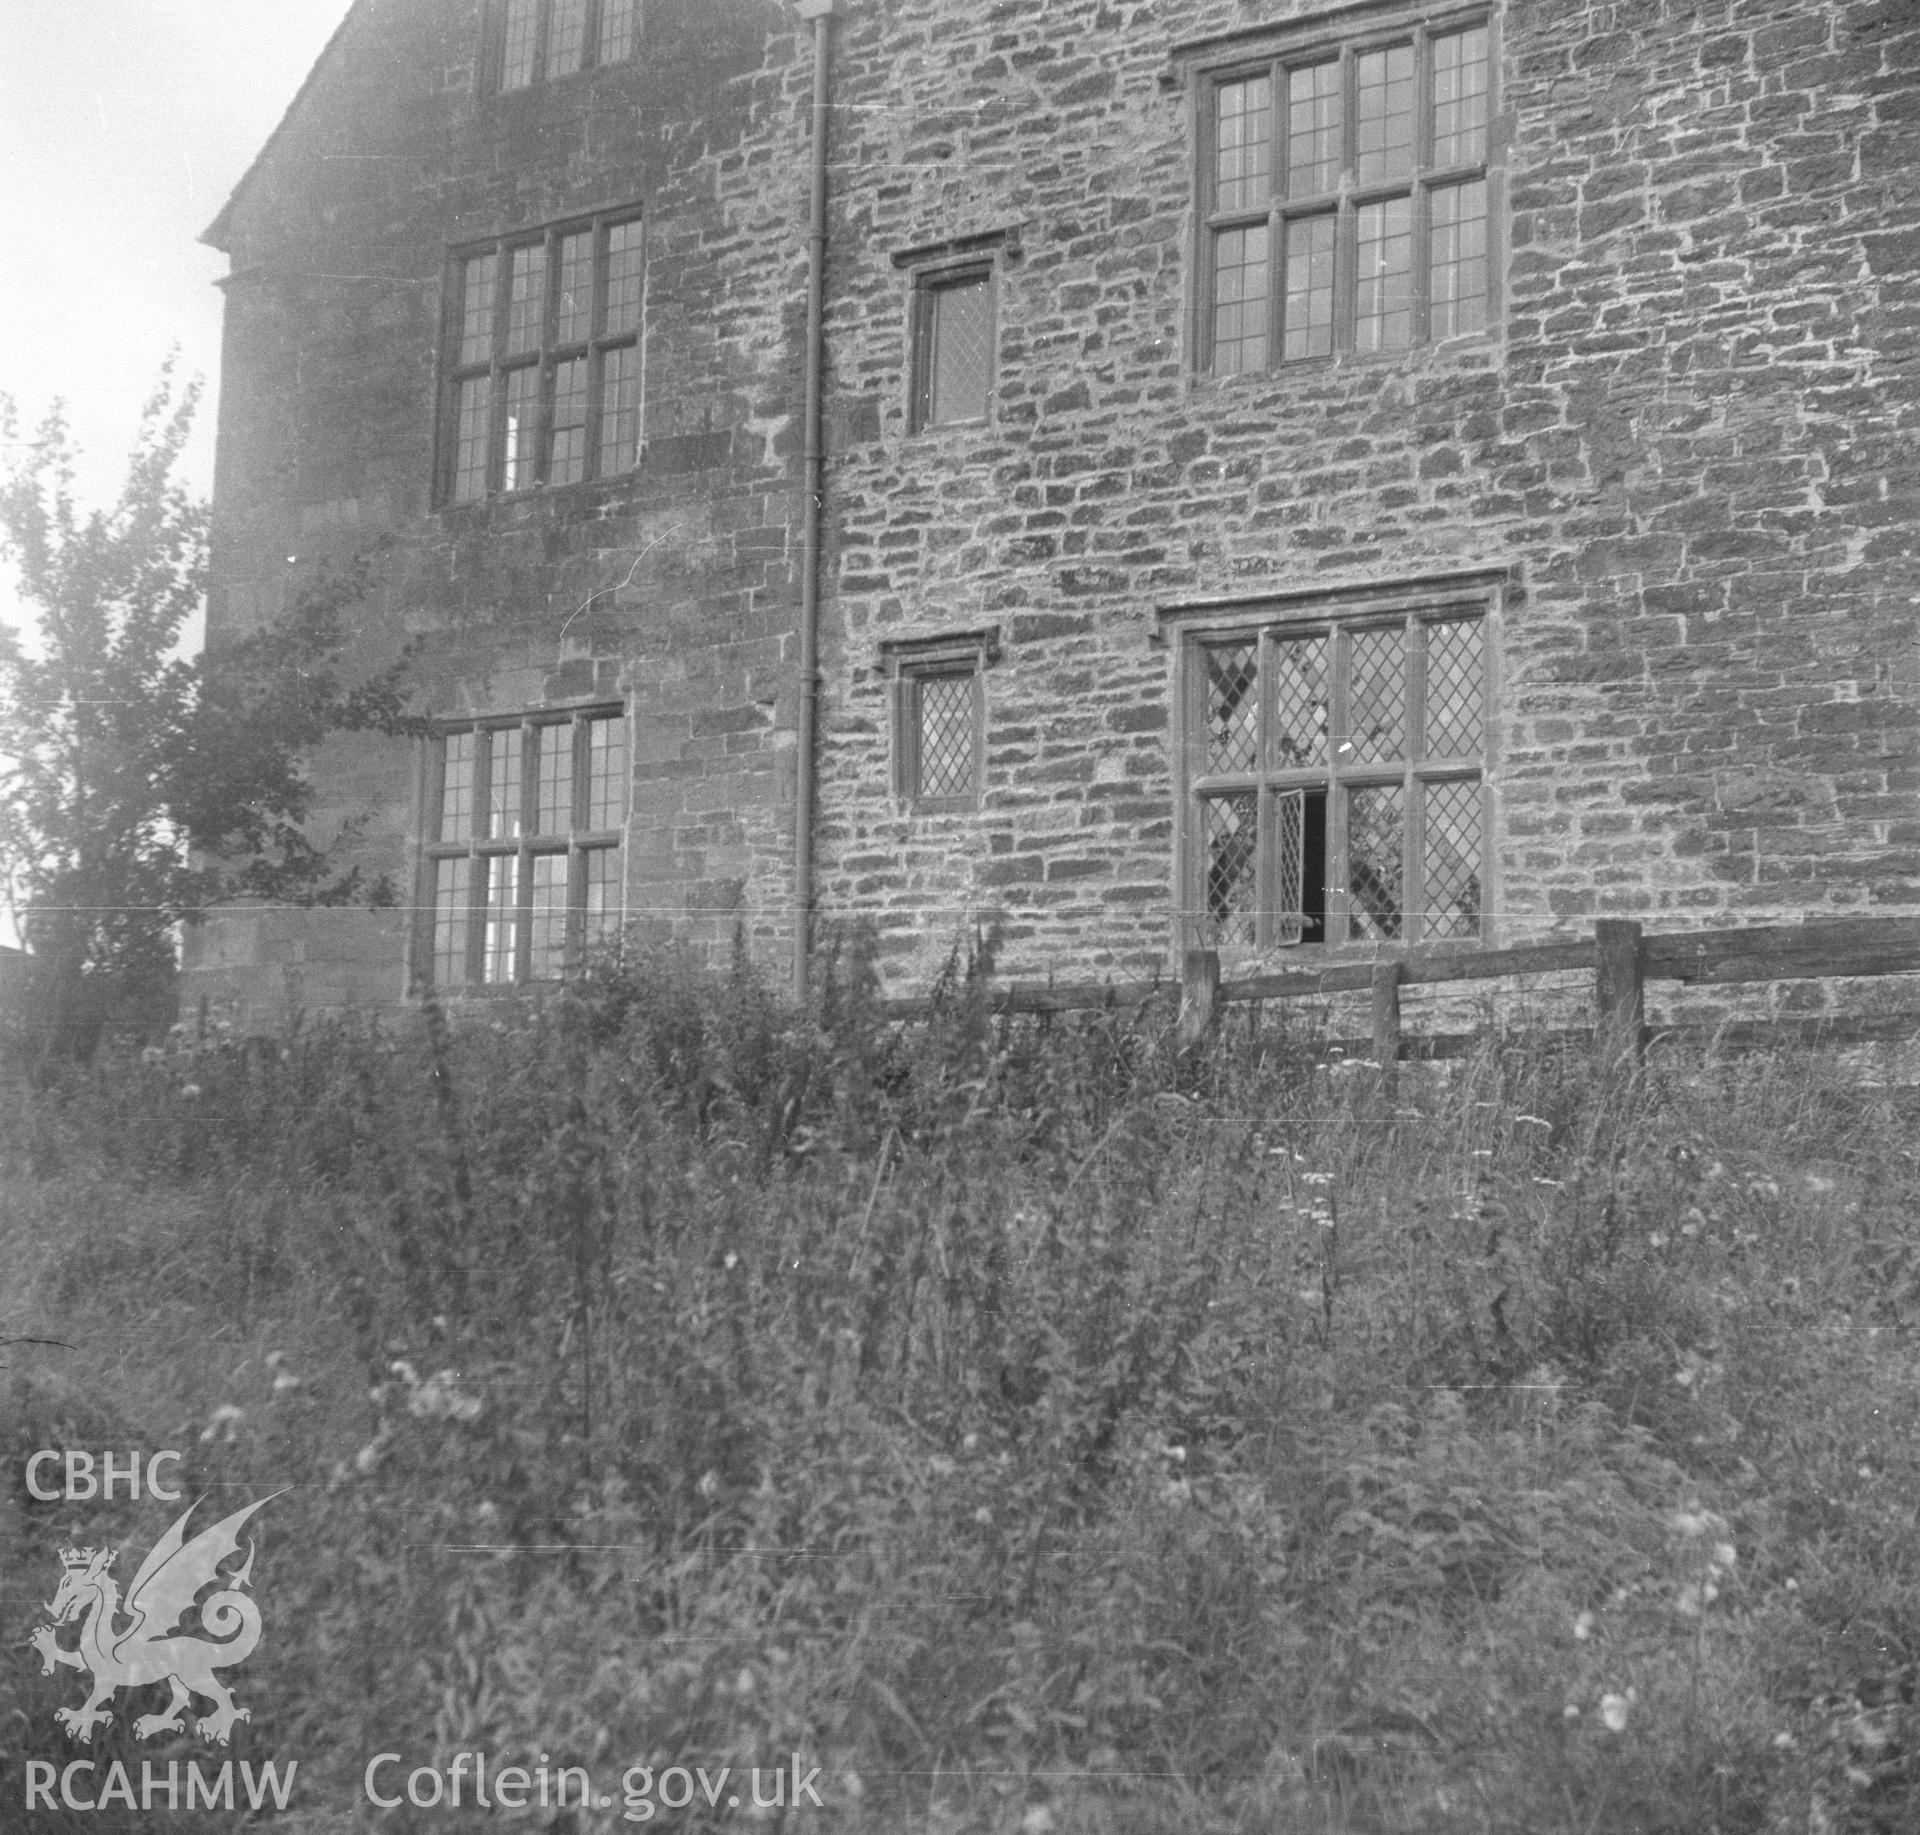 Digital copy of an undated nitrate negative showing exterior view of Treowen, Monmouthshire.